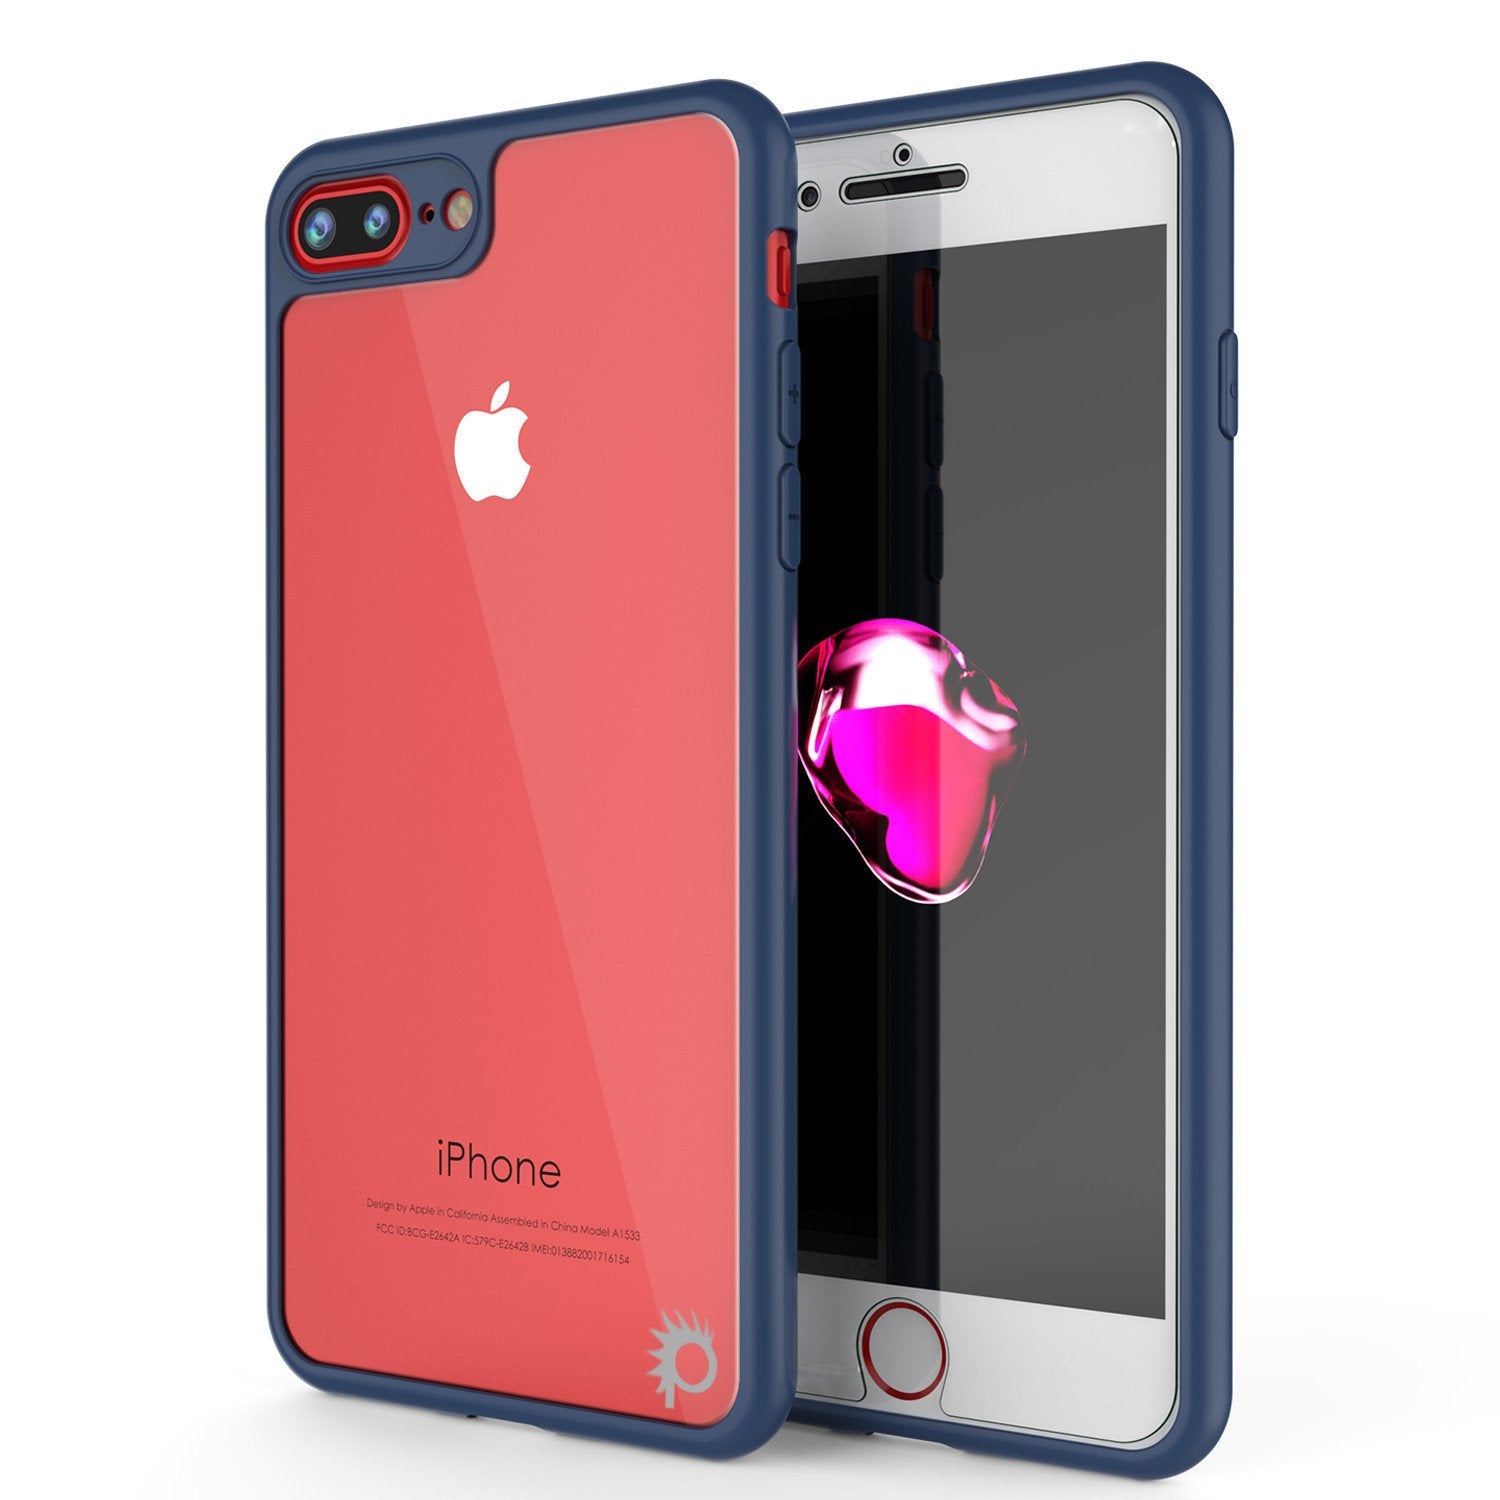 iPhone 7 PLUS Case, Punkcase [MASK Series] [NAVY] Full Body Hybrid Dual Layer TPU Cover [Clear Back] [Non Slip] [Ultra Thin Fit] W/ protective Tempered Glass Screen Protector for Apple iPhone 7s PLUS